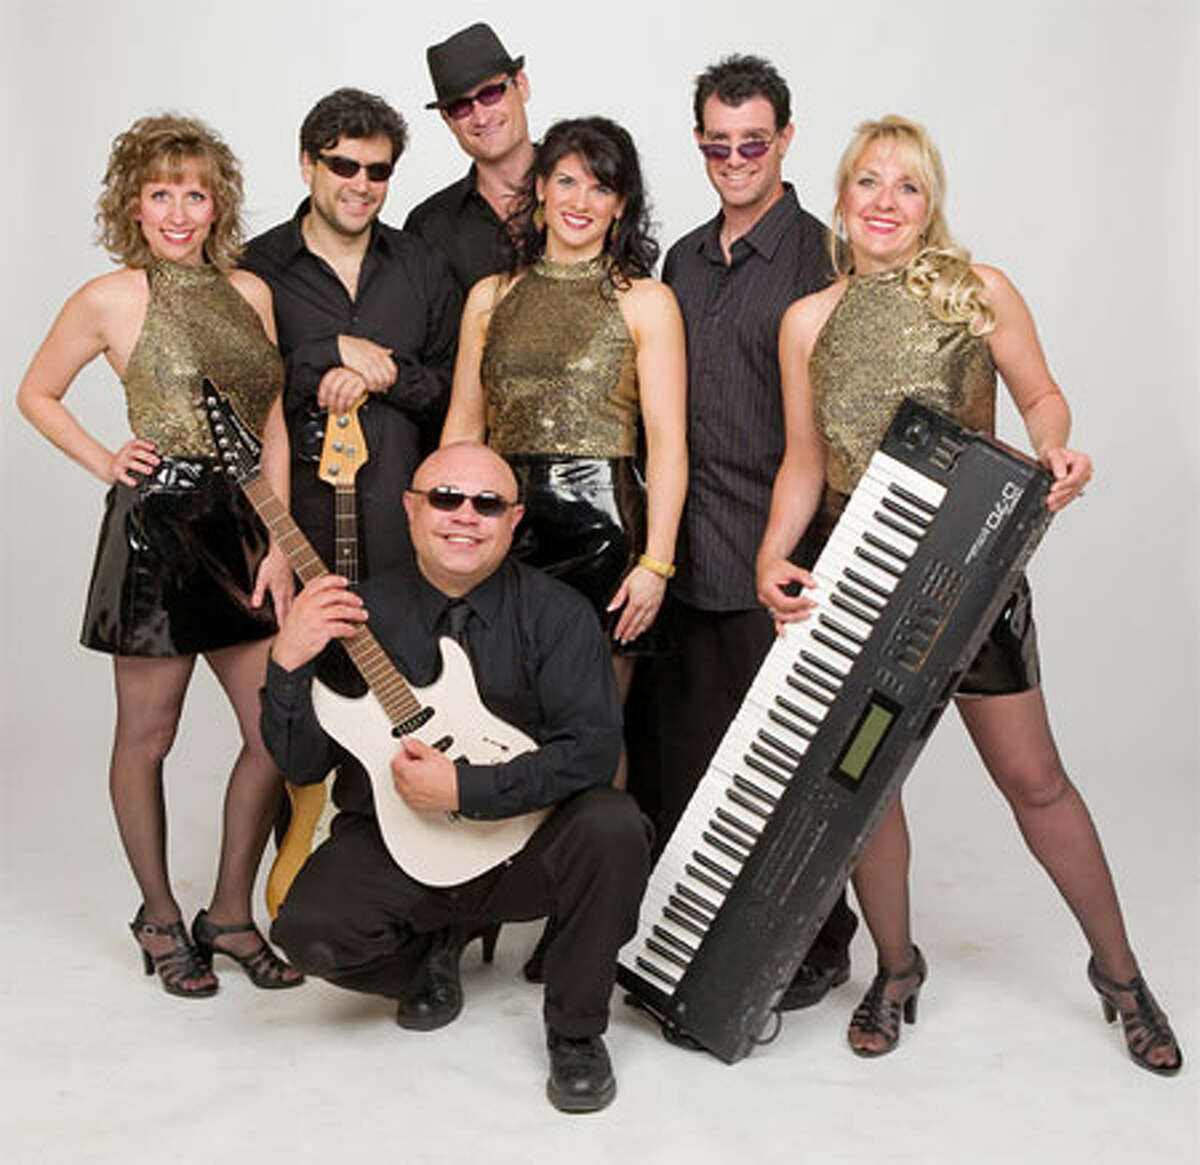 Members of The Glamour Girls band. (Photo from the band’s website)